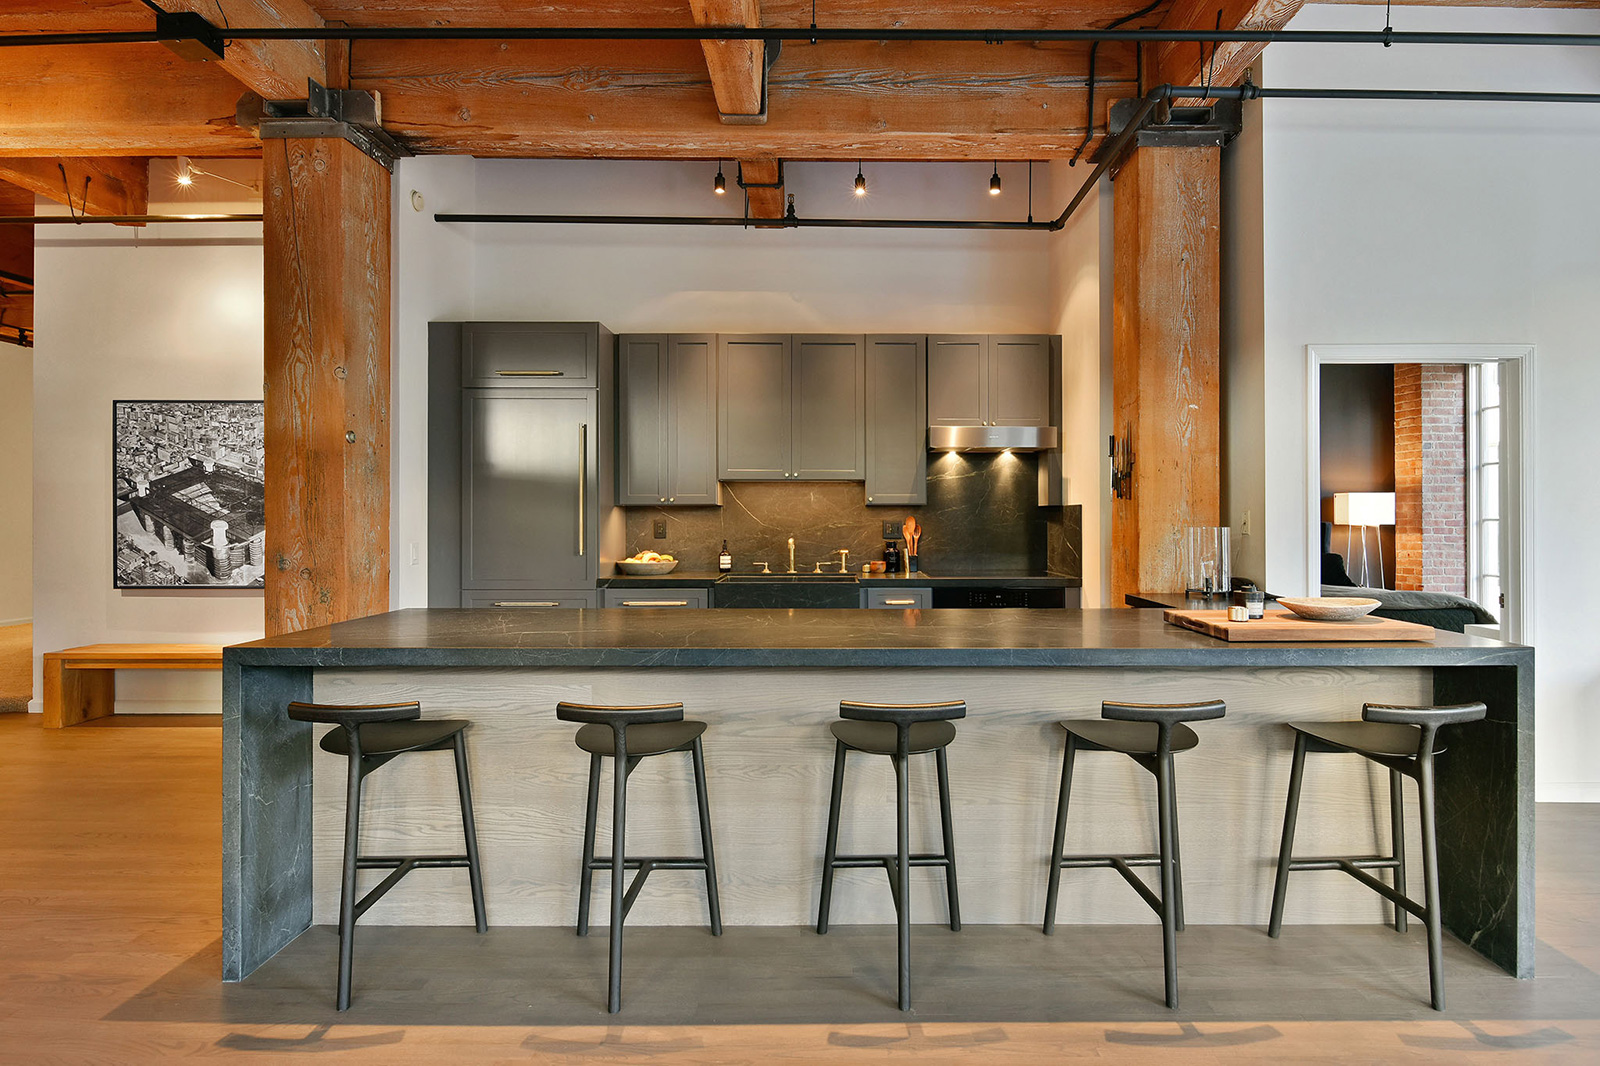 Property of the week: a light-filled live/work loft in San Francisco, 355 Bryant Street